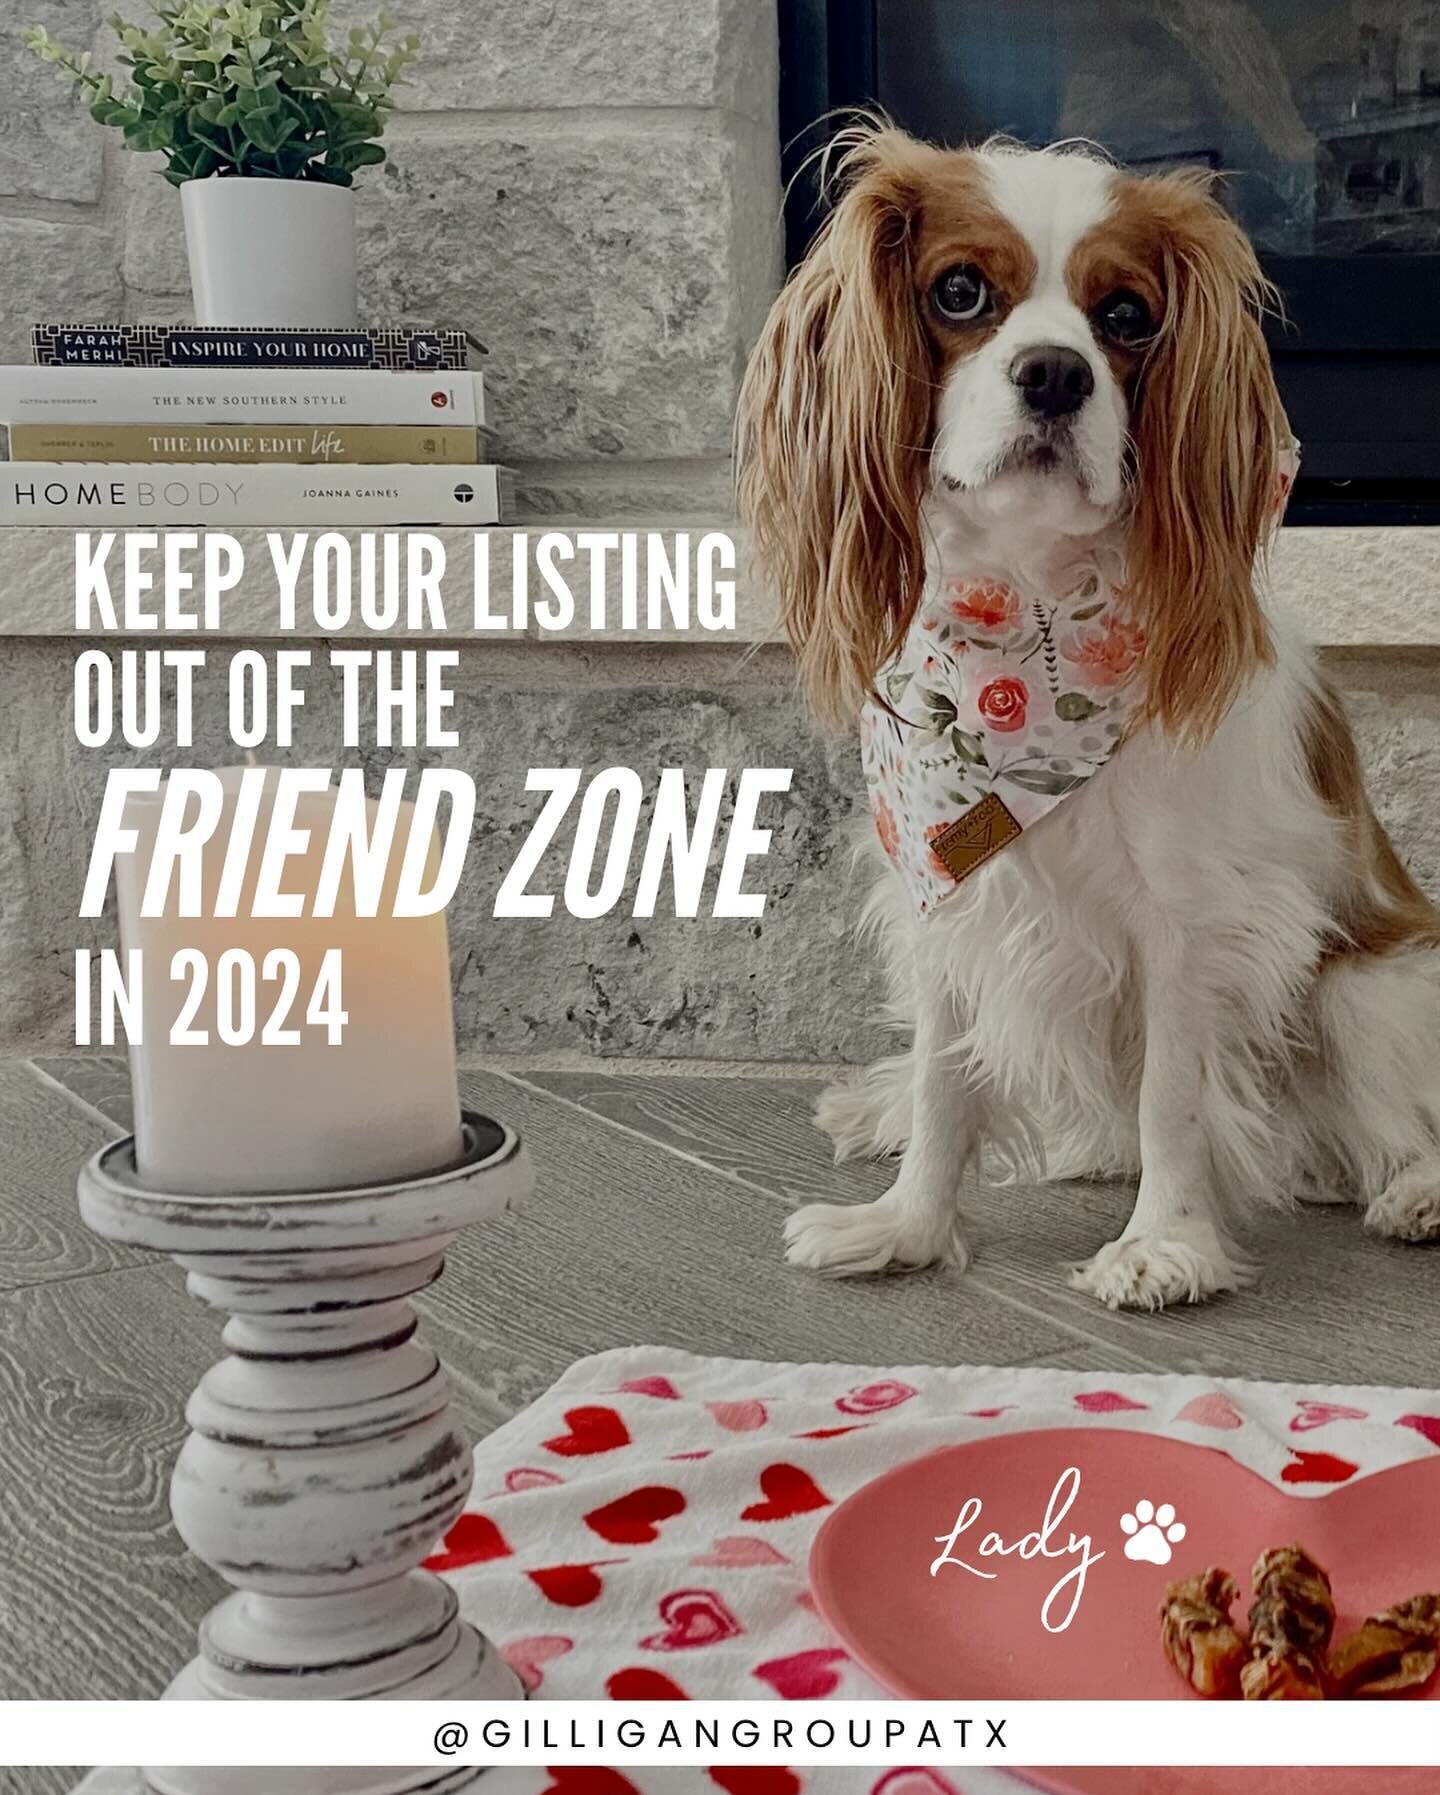 Nothing is worse than the friend zone, especially when it comes to getting your house SOLD. 🏡

We created a list of things you can do to keep your listing out of the friend zone and into the &ldquo;I can&rsquo;t imagine my life without this home&rdq